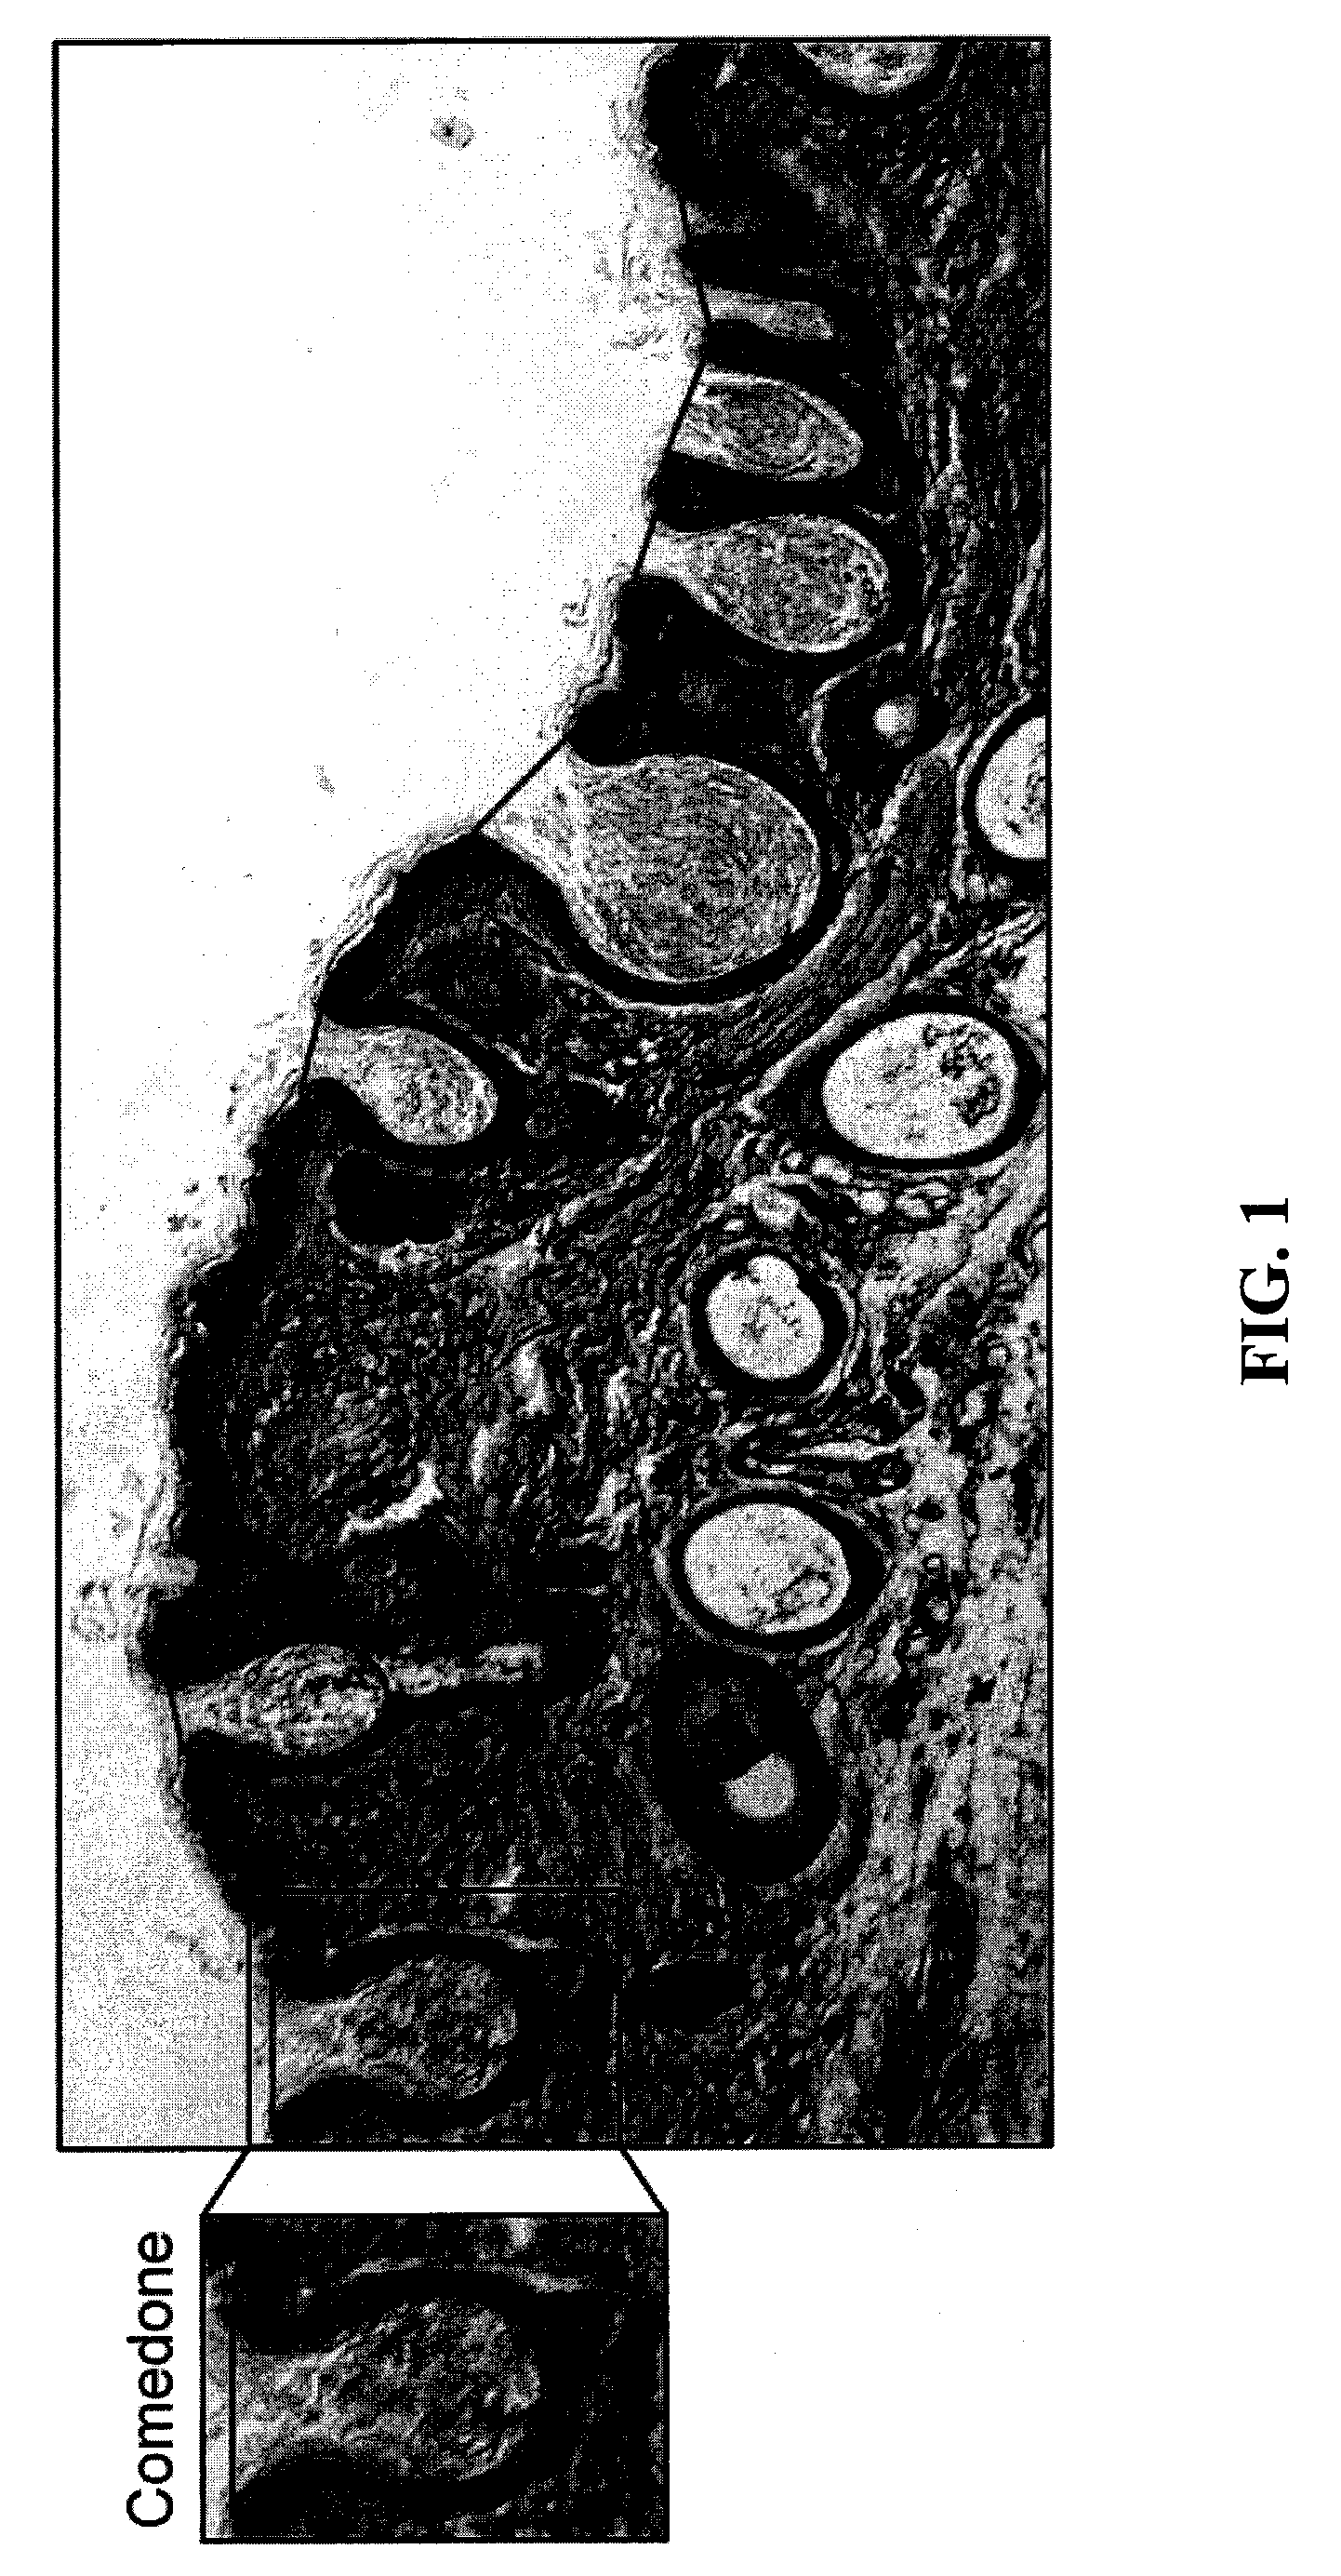 Compounds, compositions, kits and methods of use to orally and topically treat acne and other skin conditions by administering a 19-nor containing vitamin d analog with or without a retinoid